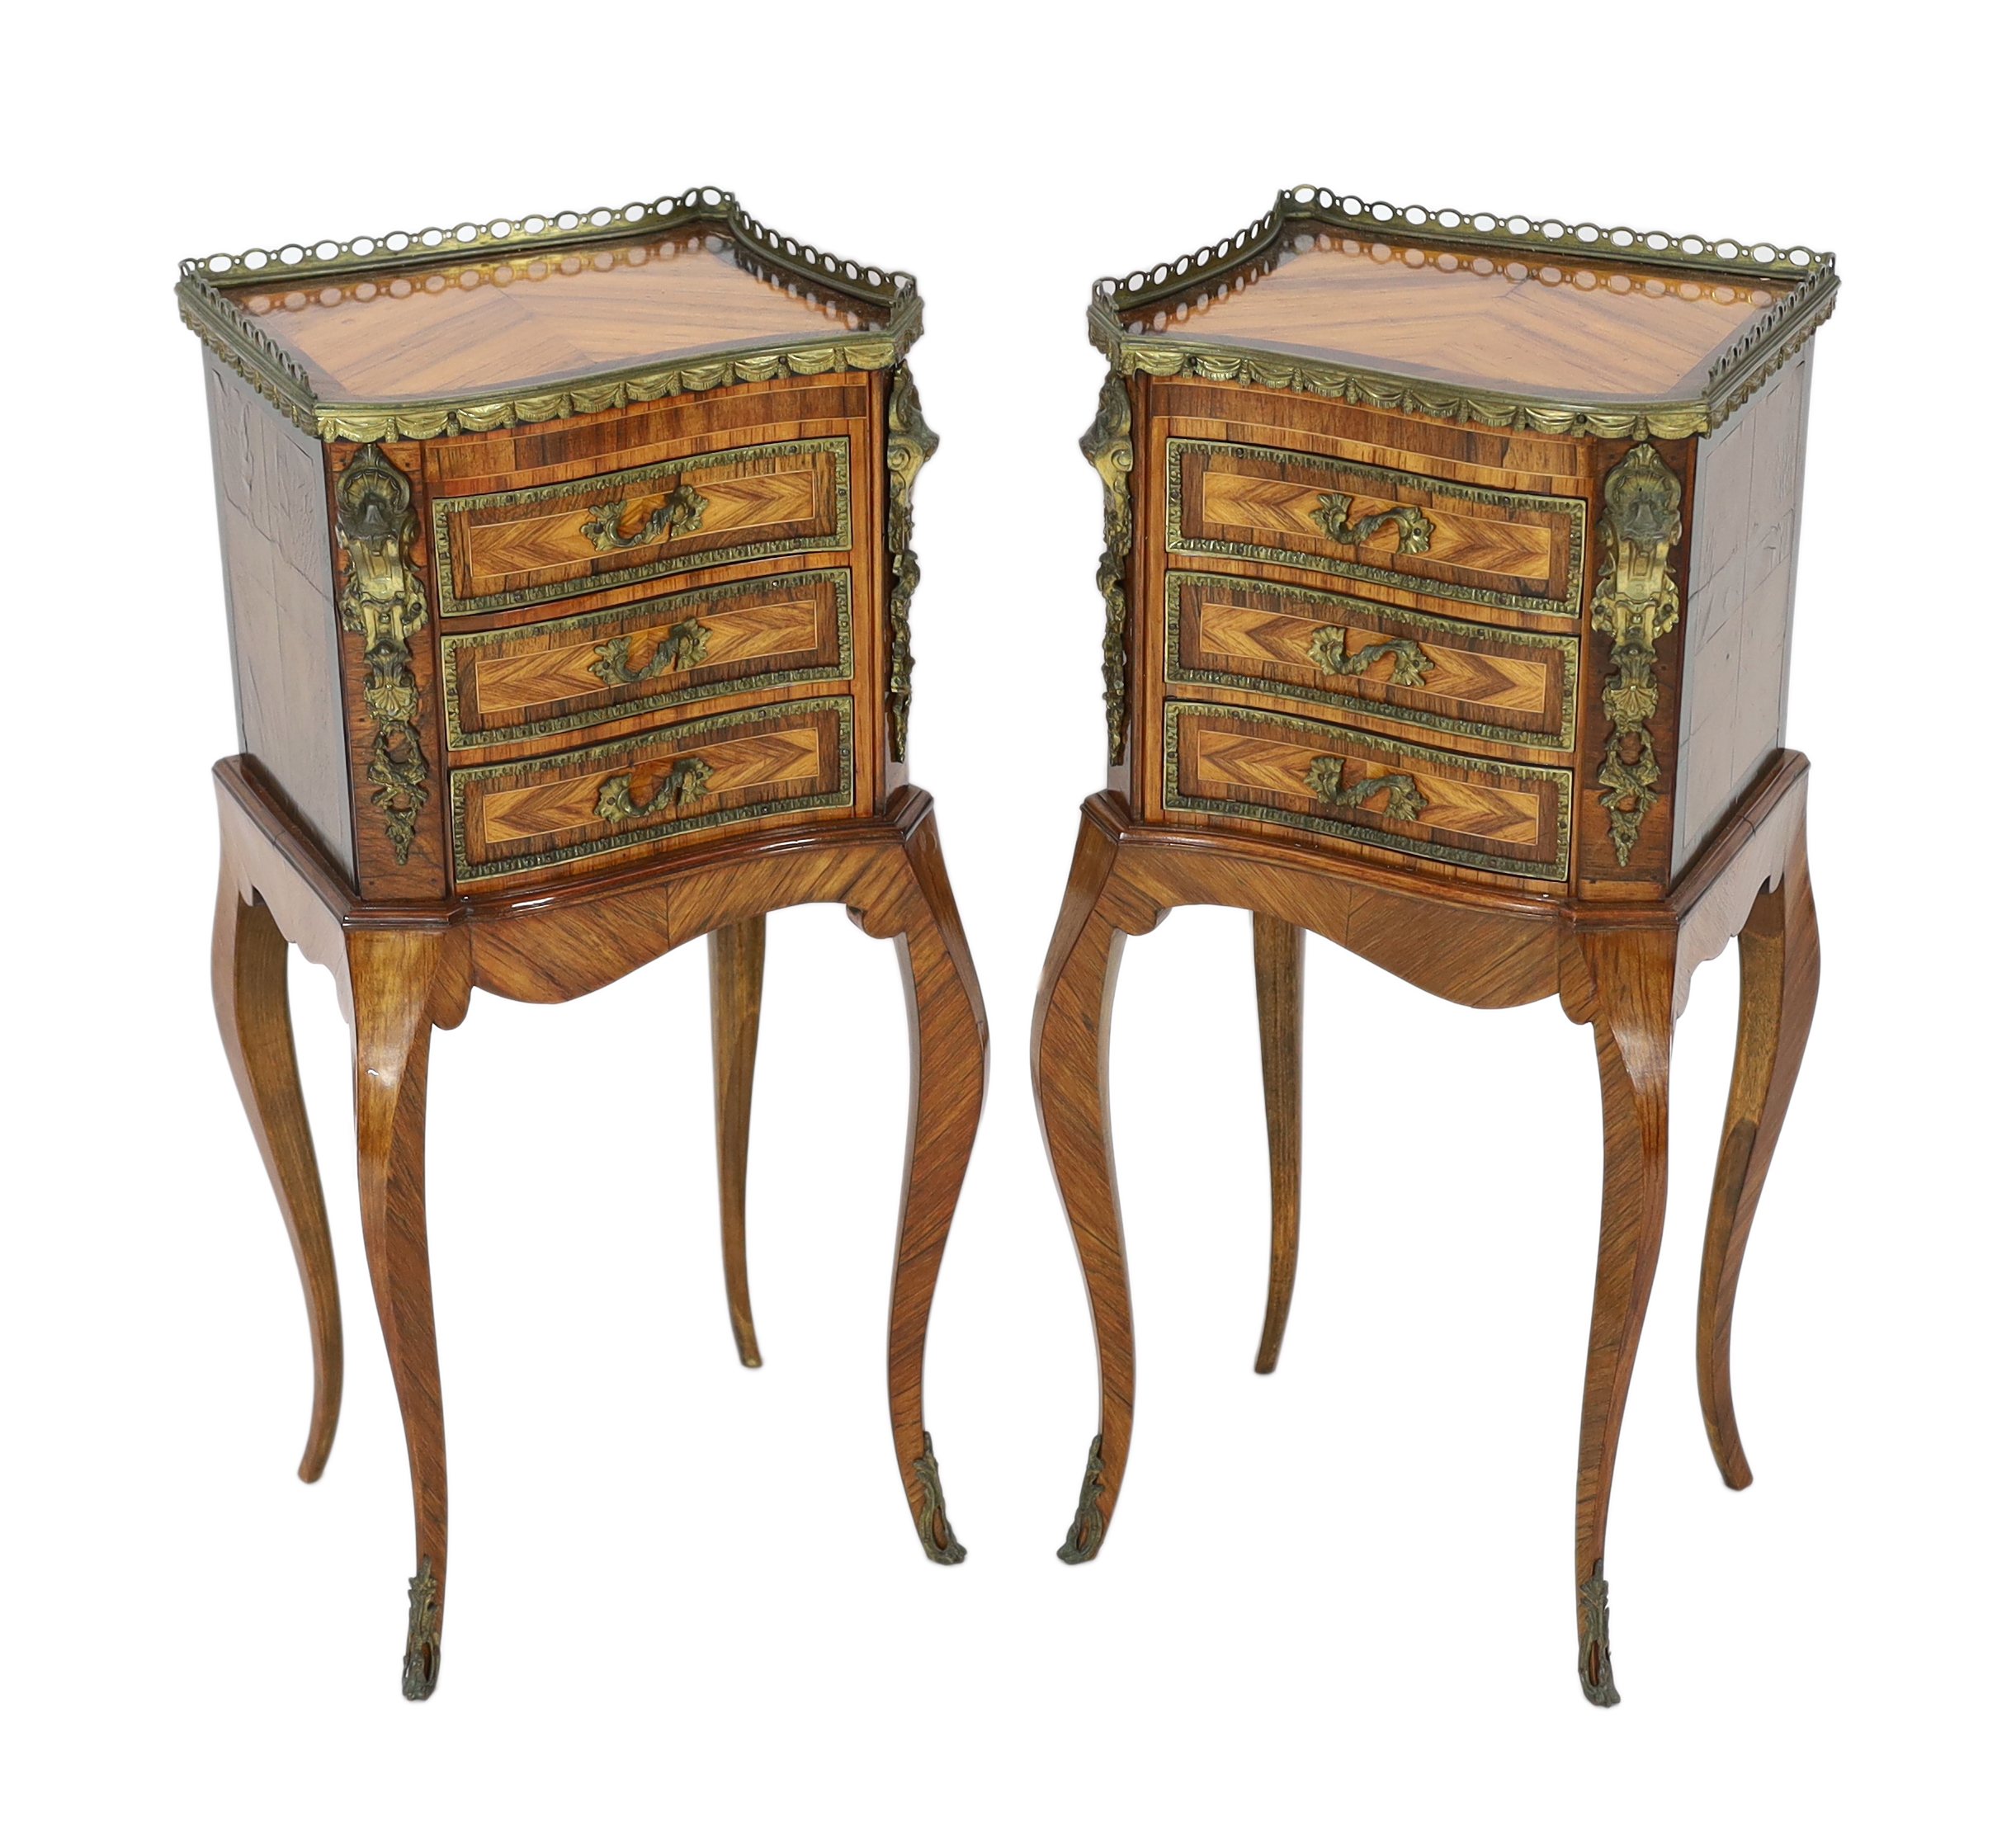 A pair of Louis XVI style ormolu mounted kingwood bedside chests, each of asymmetrical scroll form